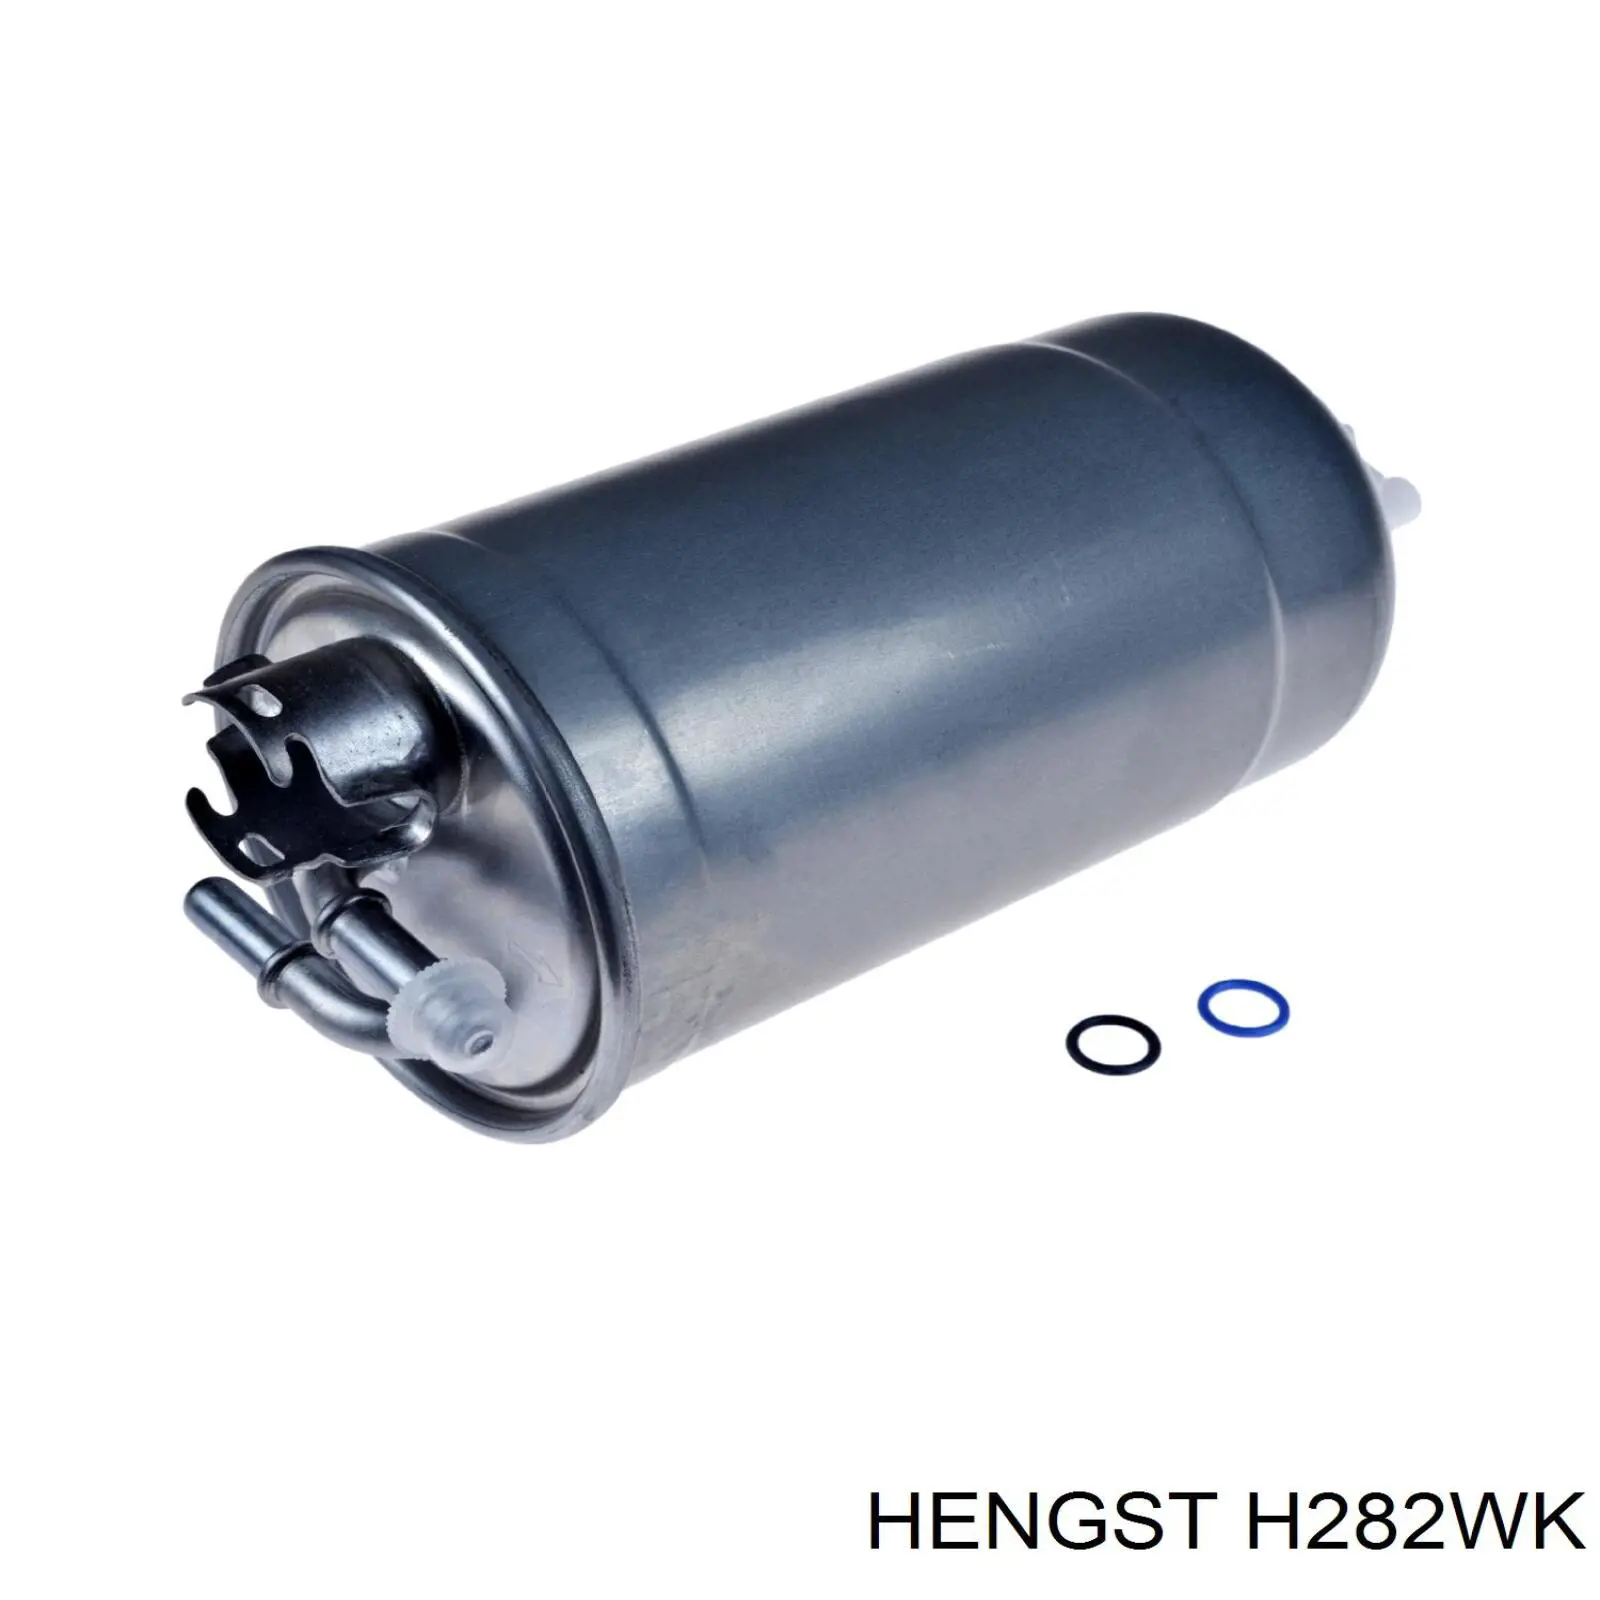 H282WK Hengst filtro combustible